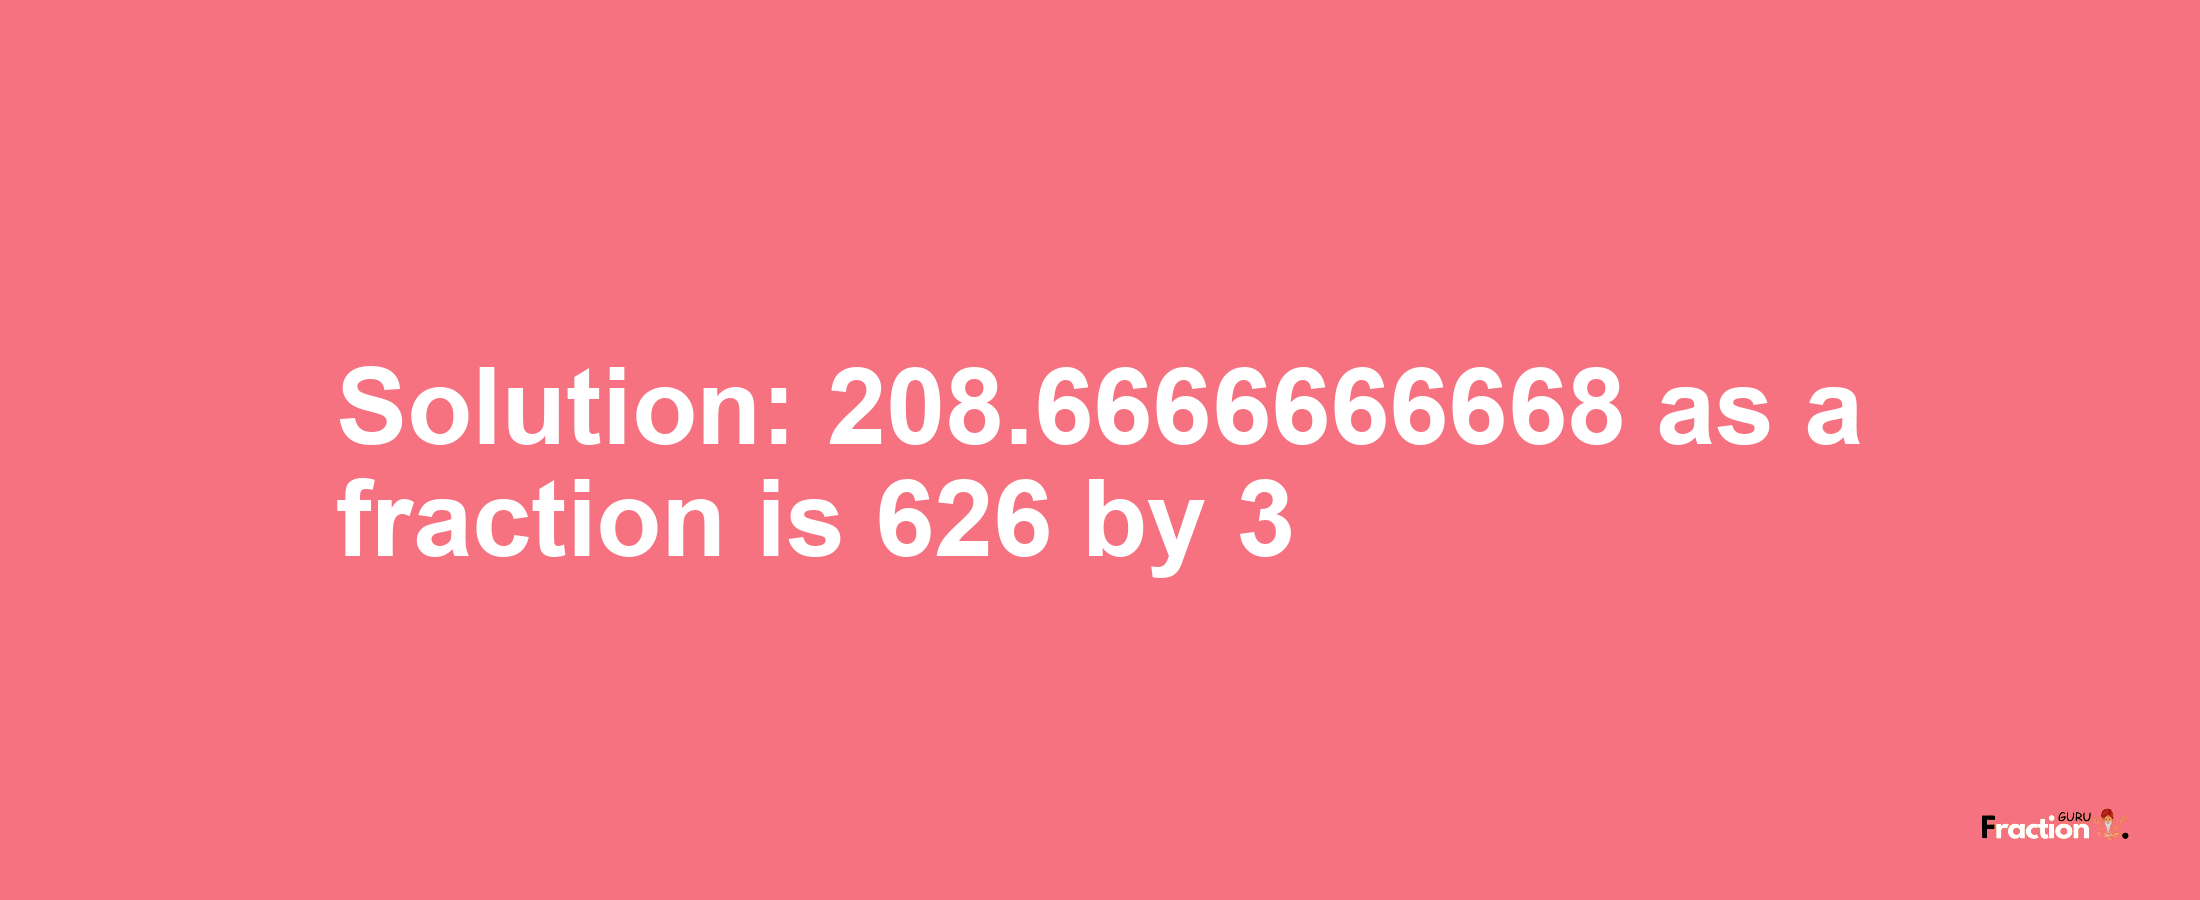 Solution:208.6666666668 as a fraction is 626/3